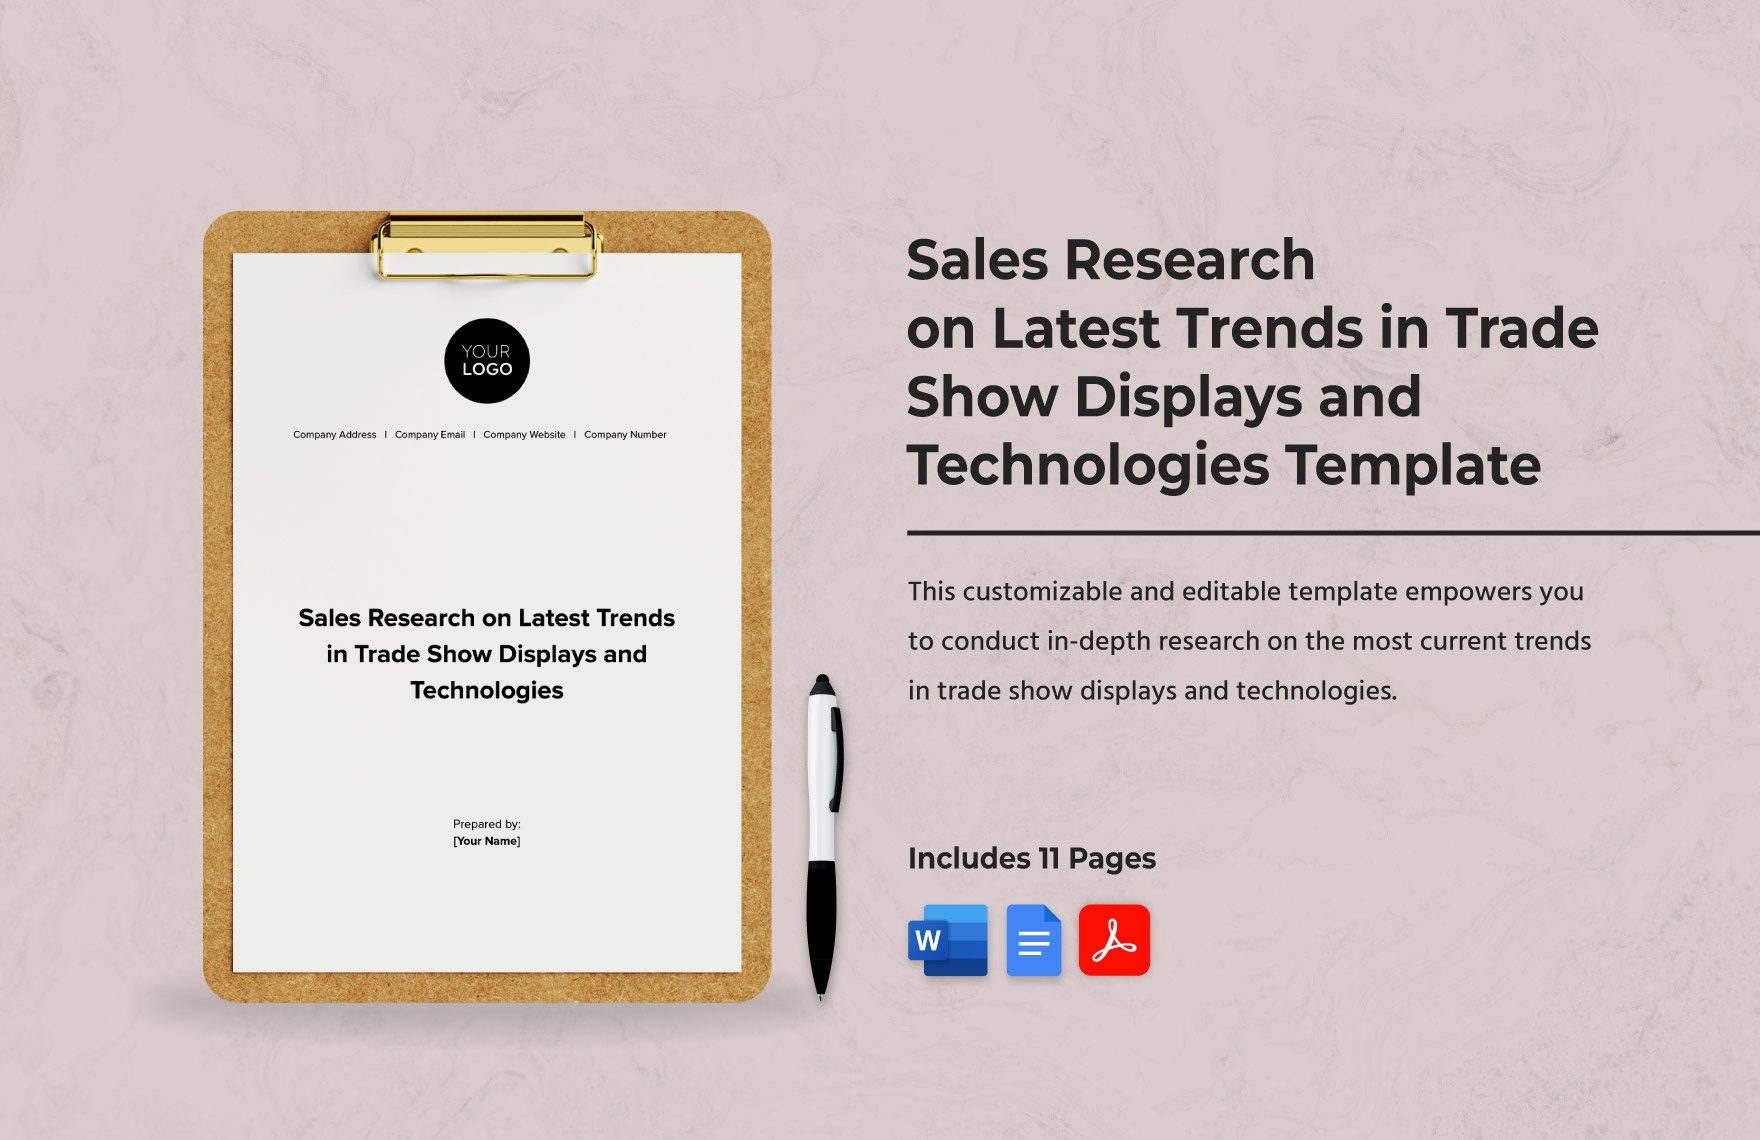 Sales Research on Latest Trends in Trade Show Displays and Technologies Template